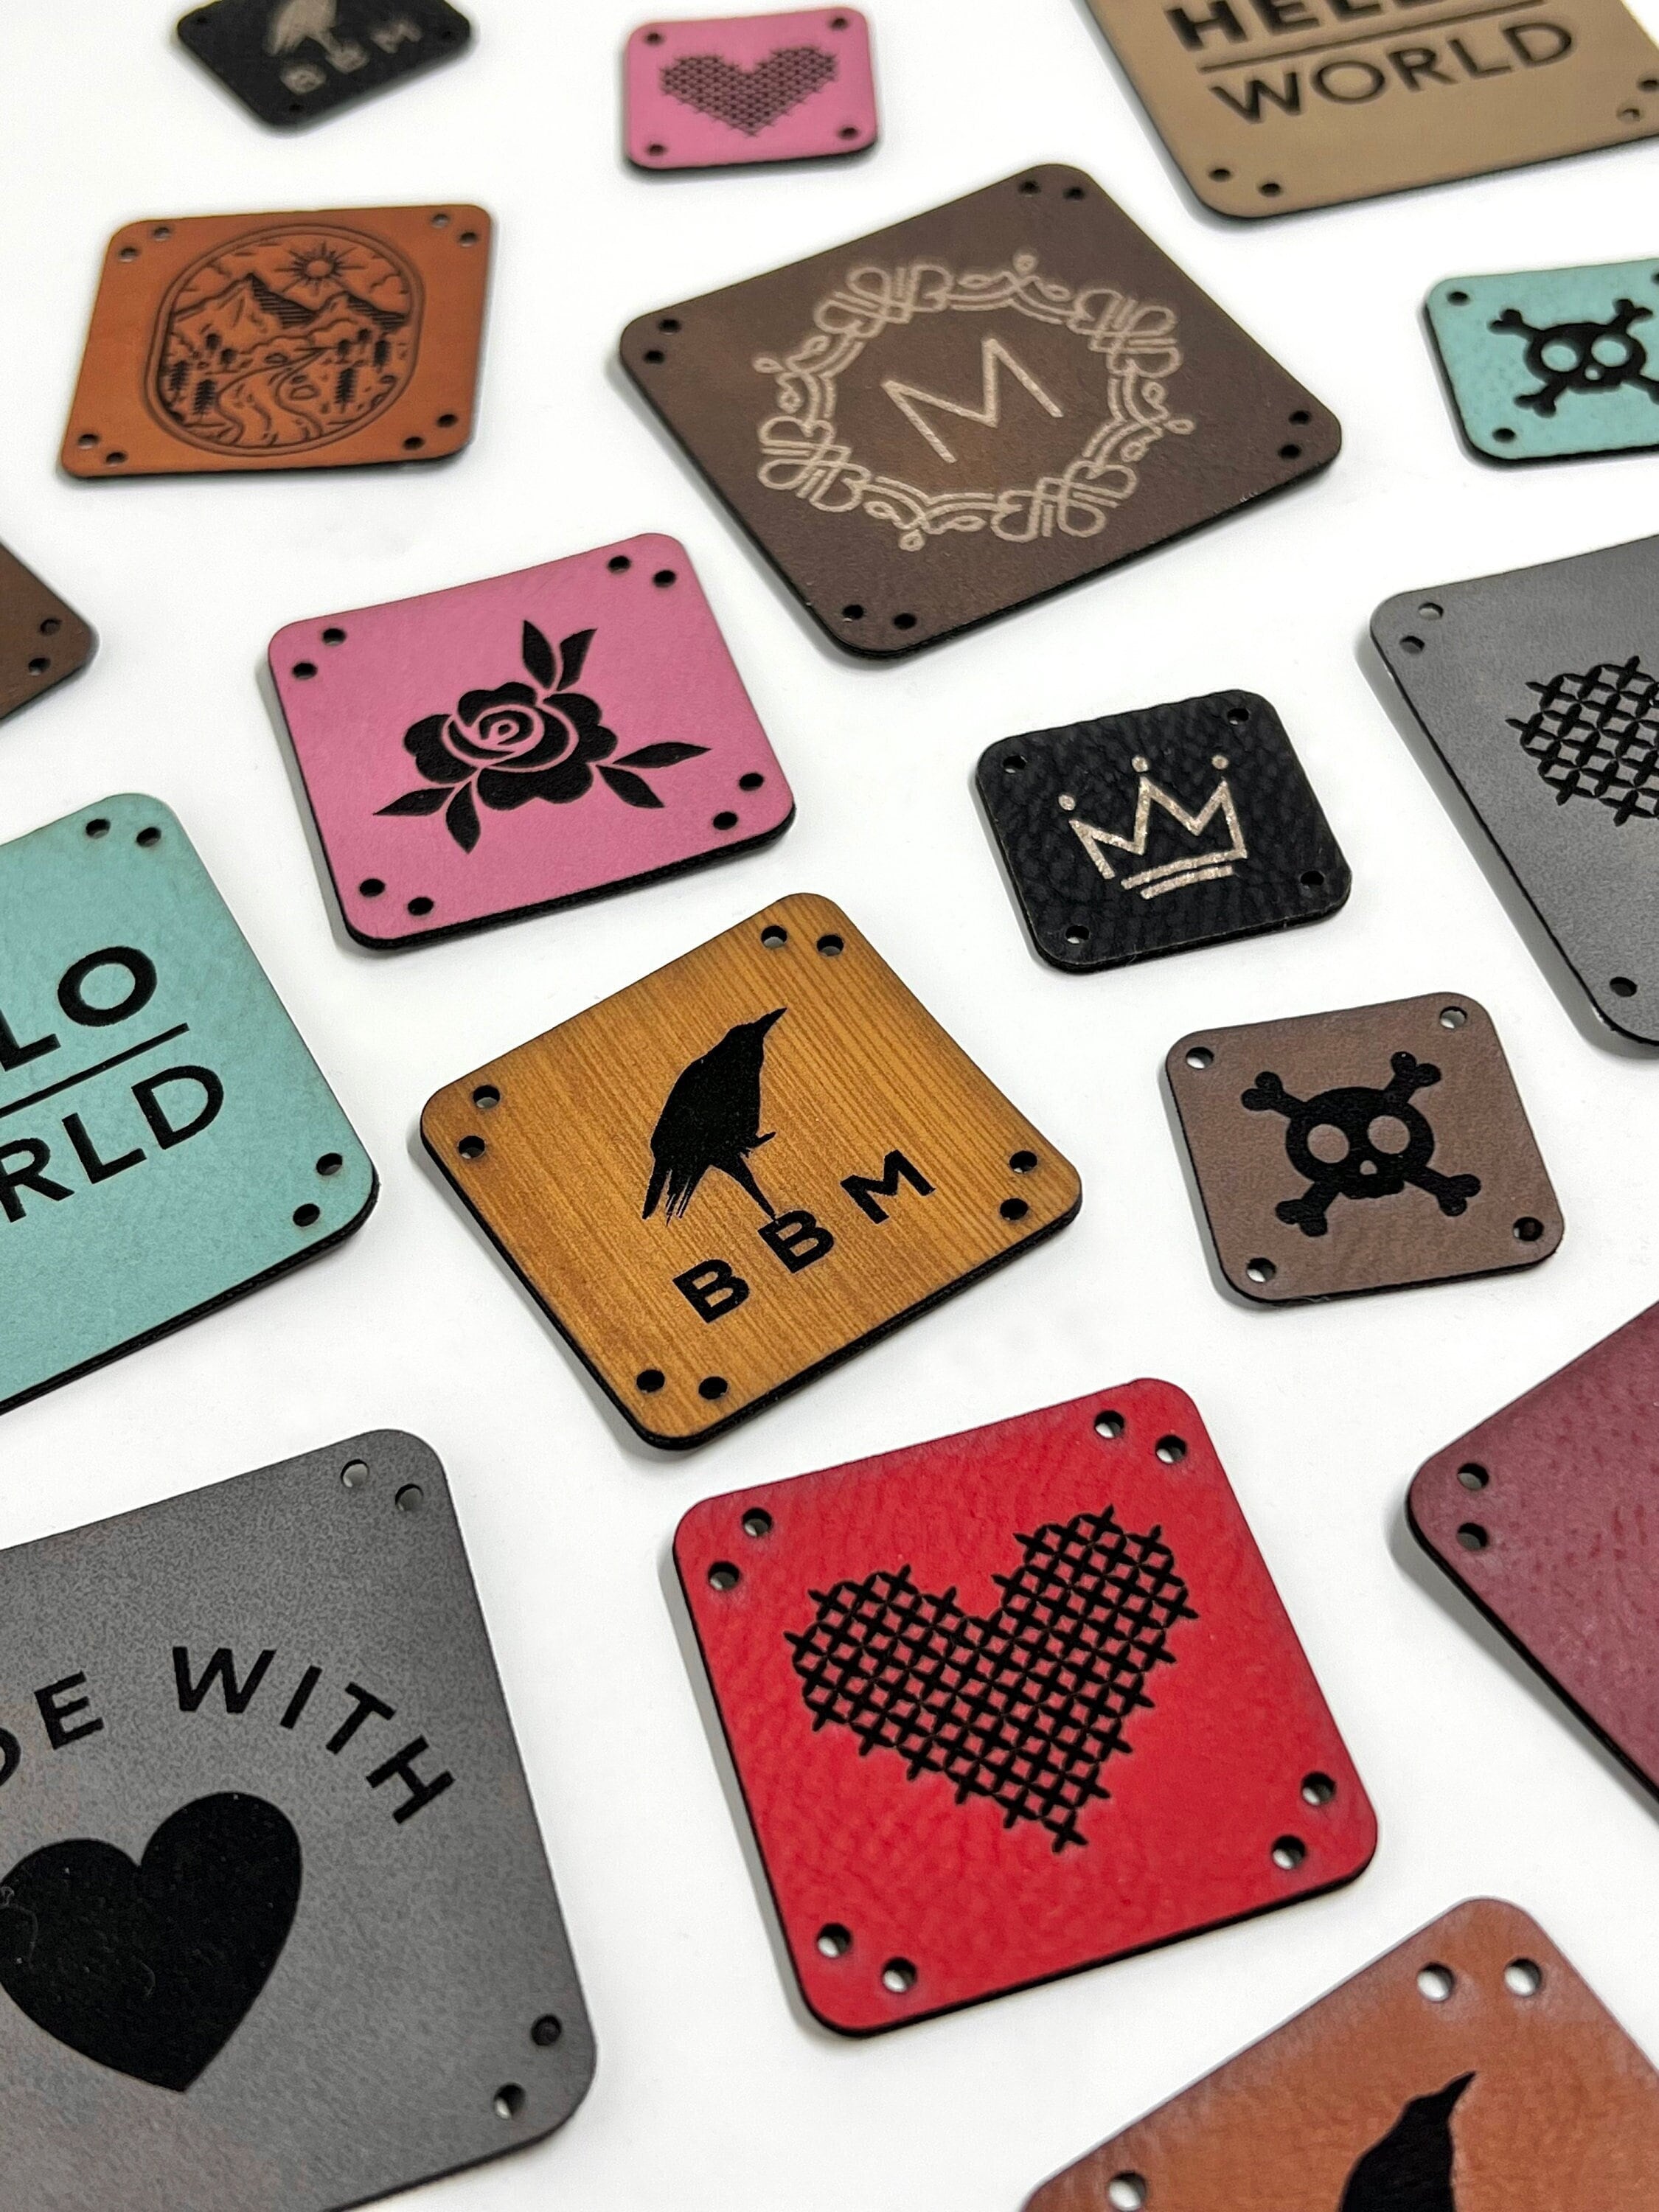 Faux Leather Tags for Handmade Items SEW ON Personalized Logo Labels for  Crochet PU Clothing Tags for 